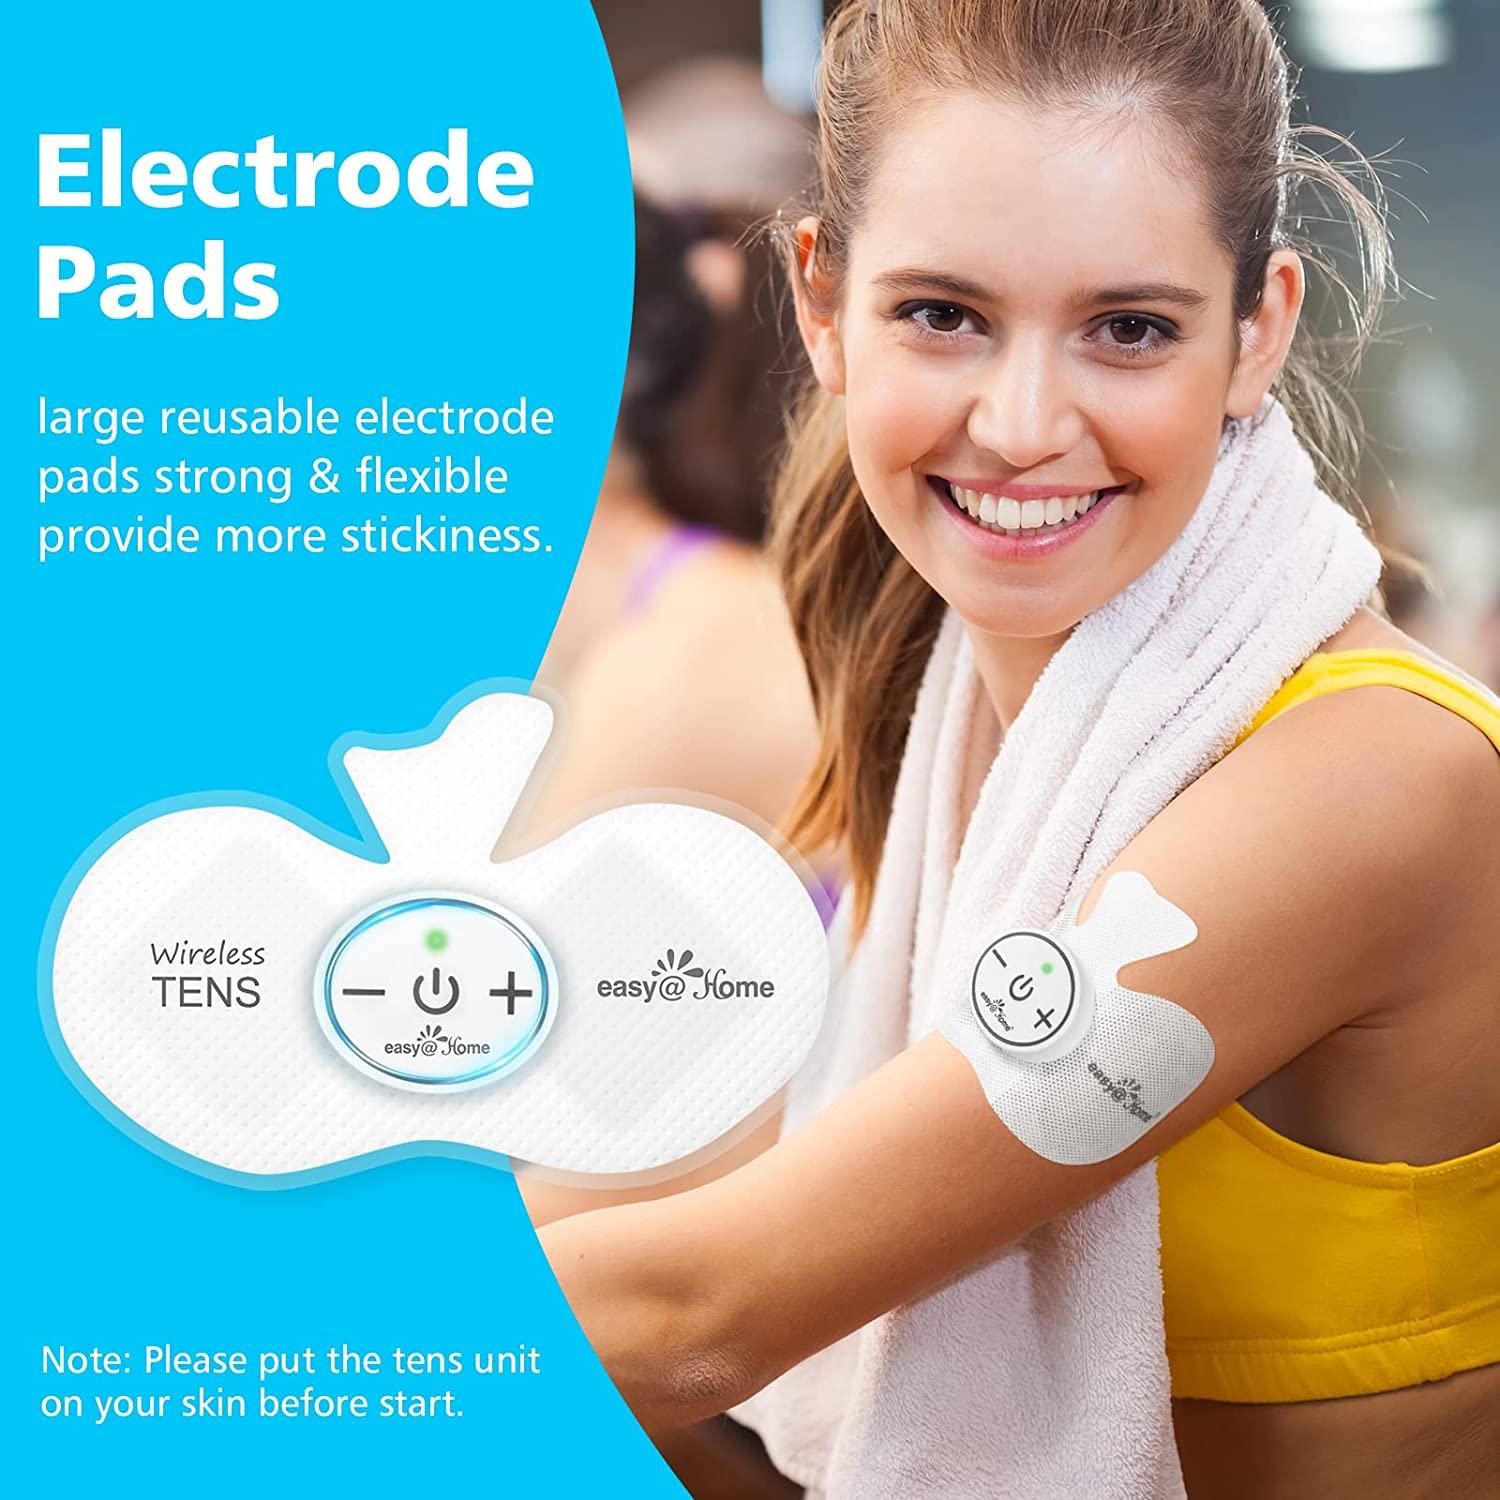 Easy@Home Electronic Pain Relief Stimulator: Tens Unit Wireless Muscle Stimulator | PMS Massage Therapy Machine | Portable Electrode Pads | FSA